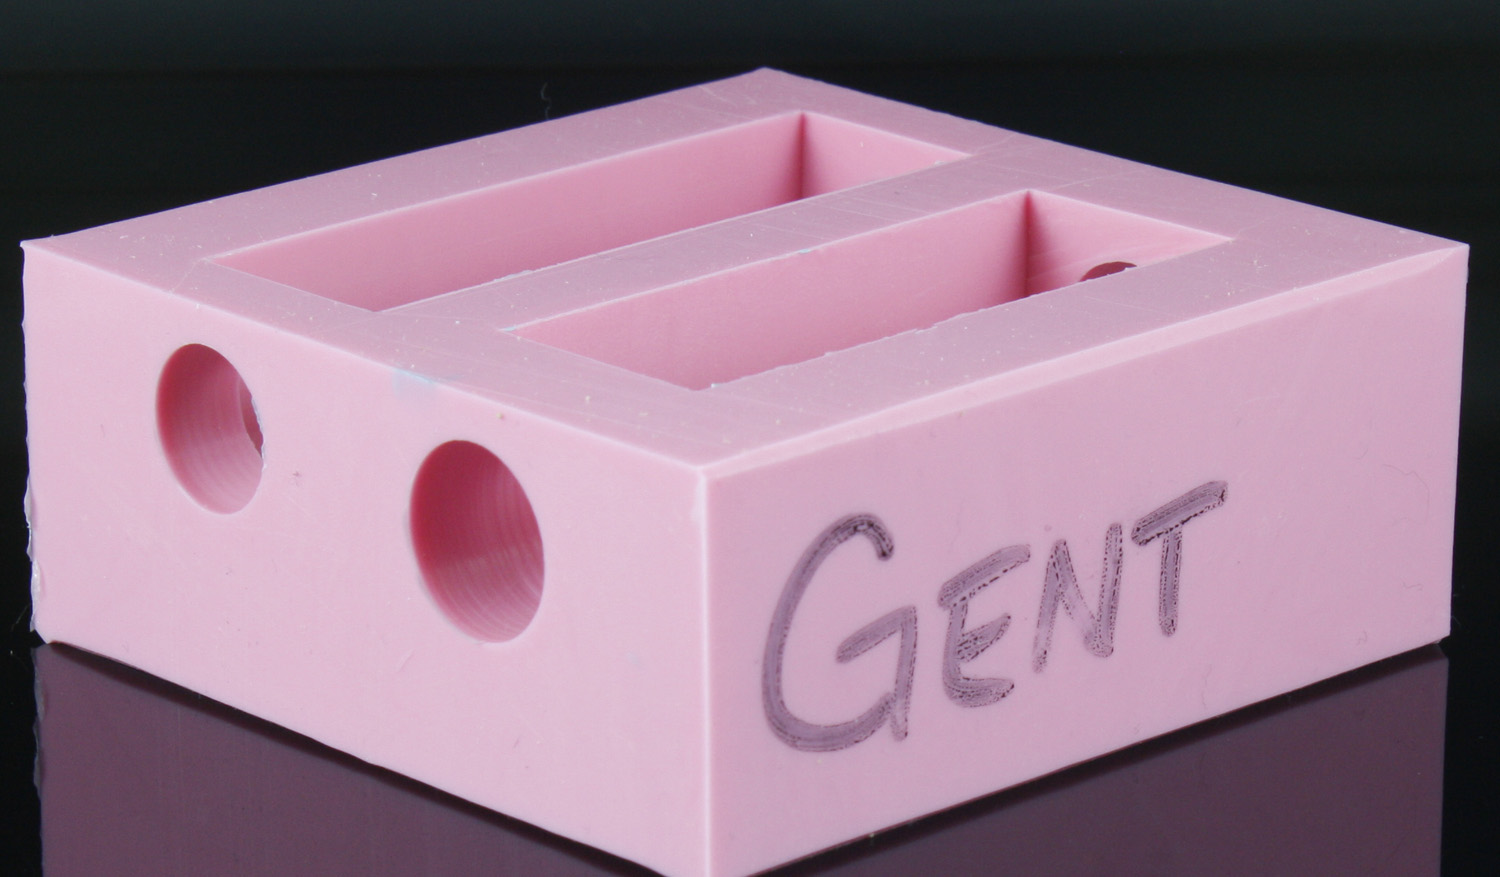 Gent "Tube-In" Casting Mold